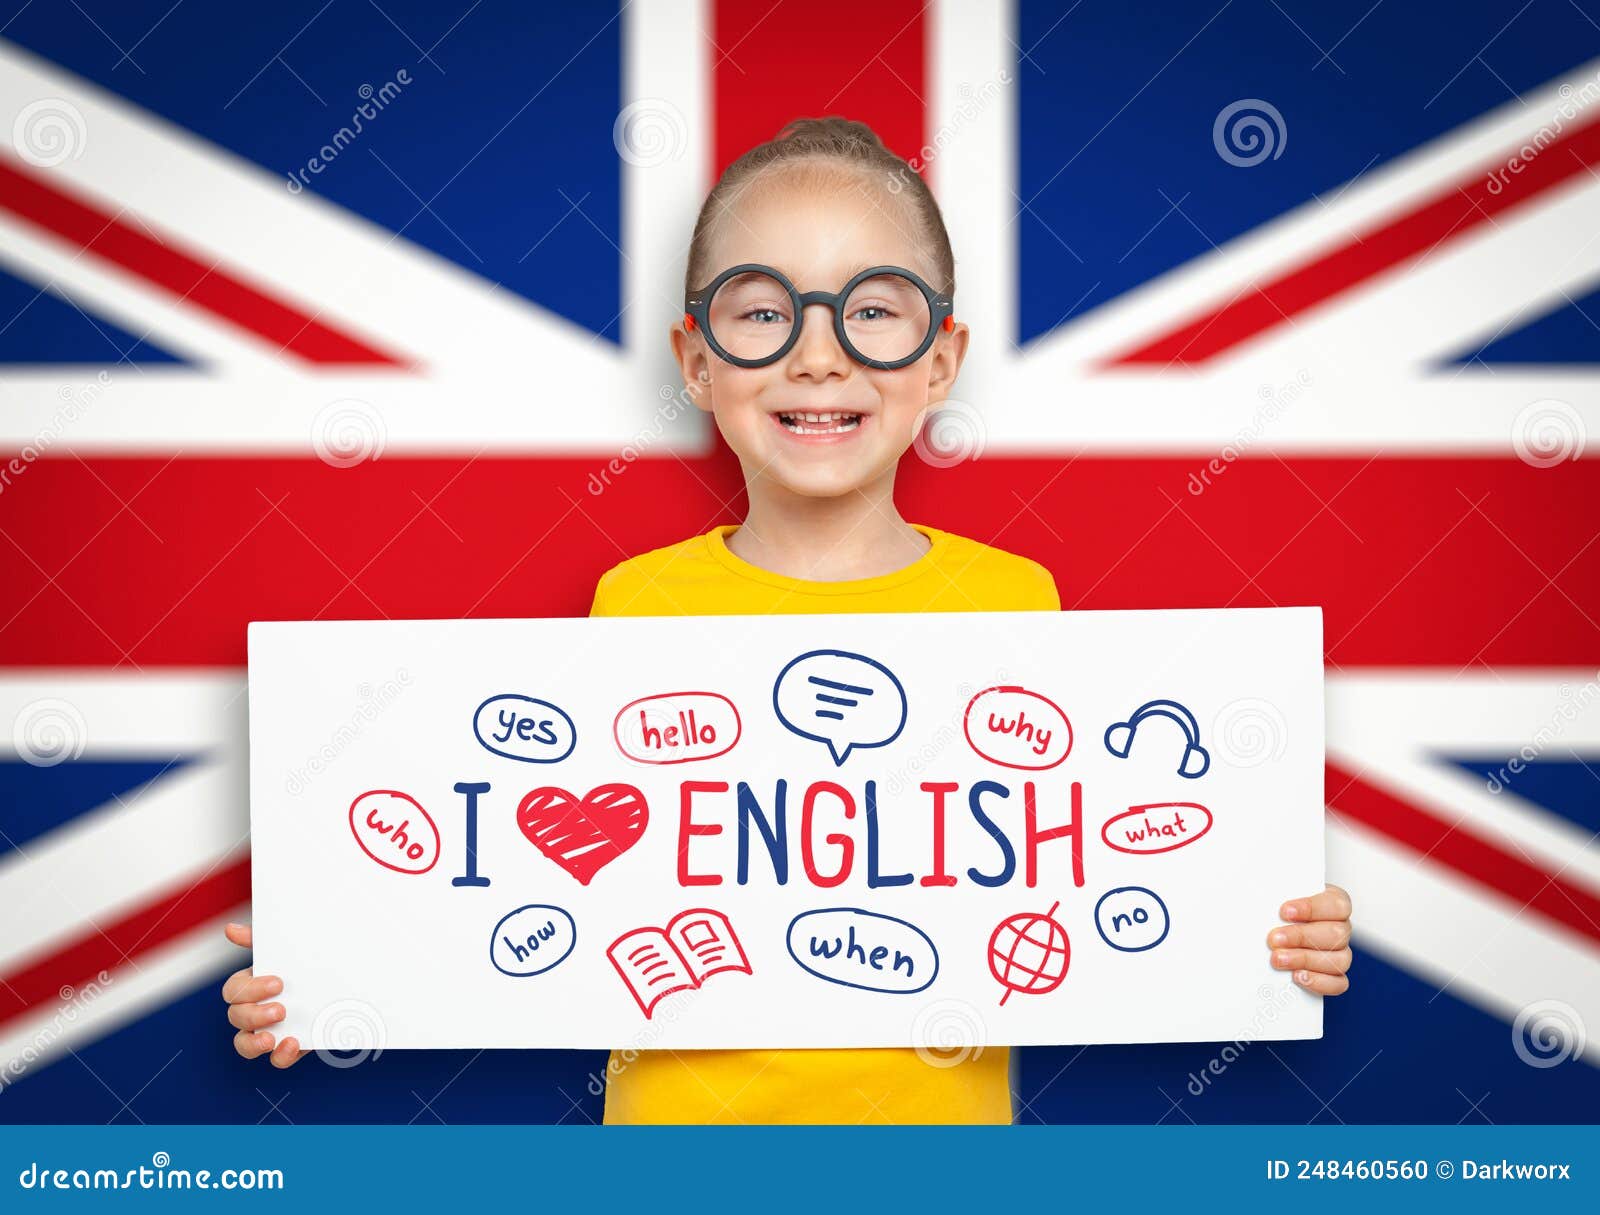 Learn English with Kings in the UK and USA